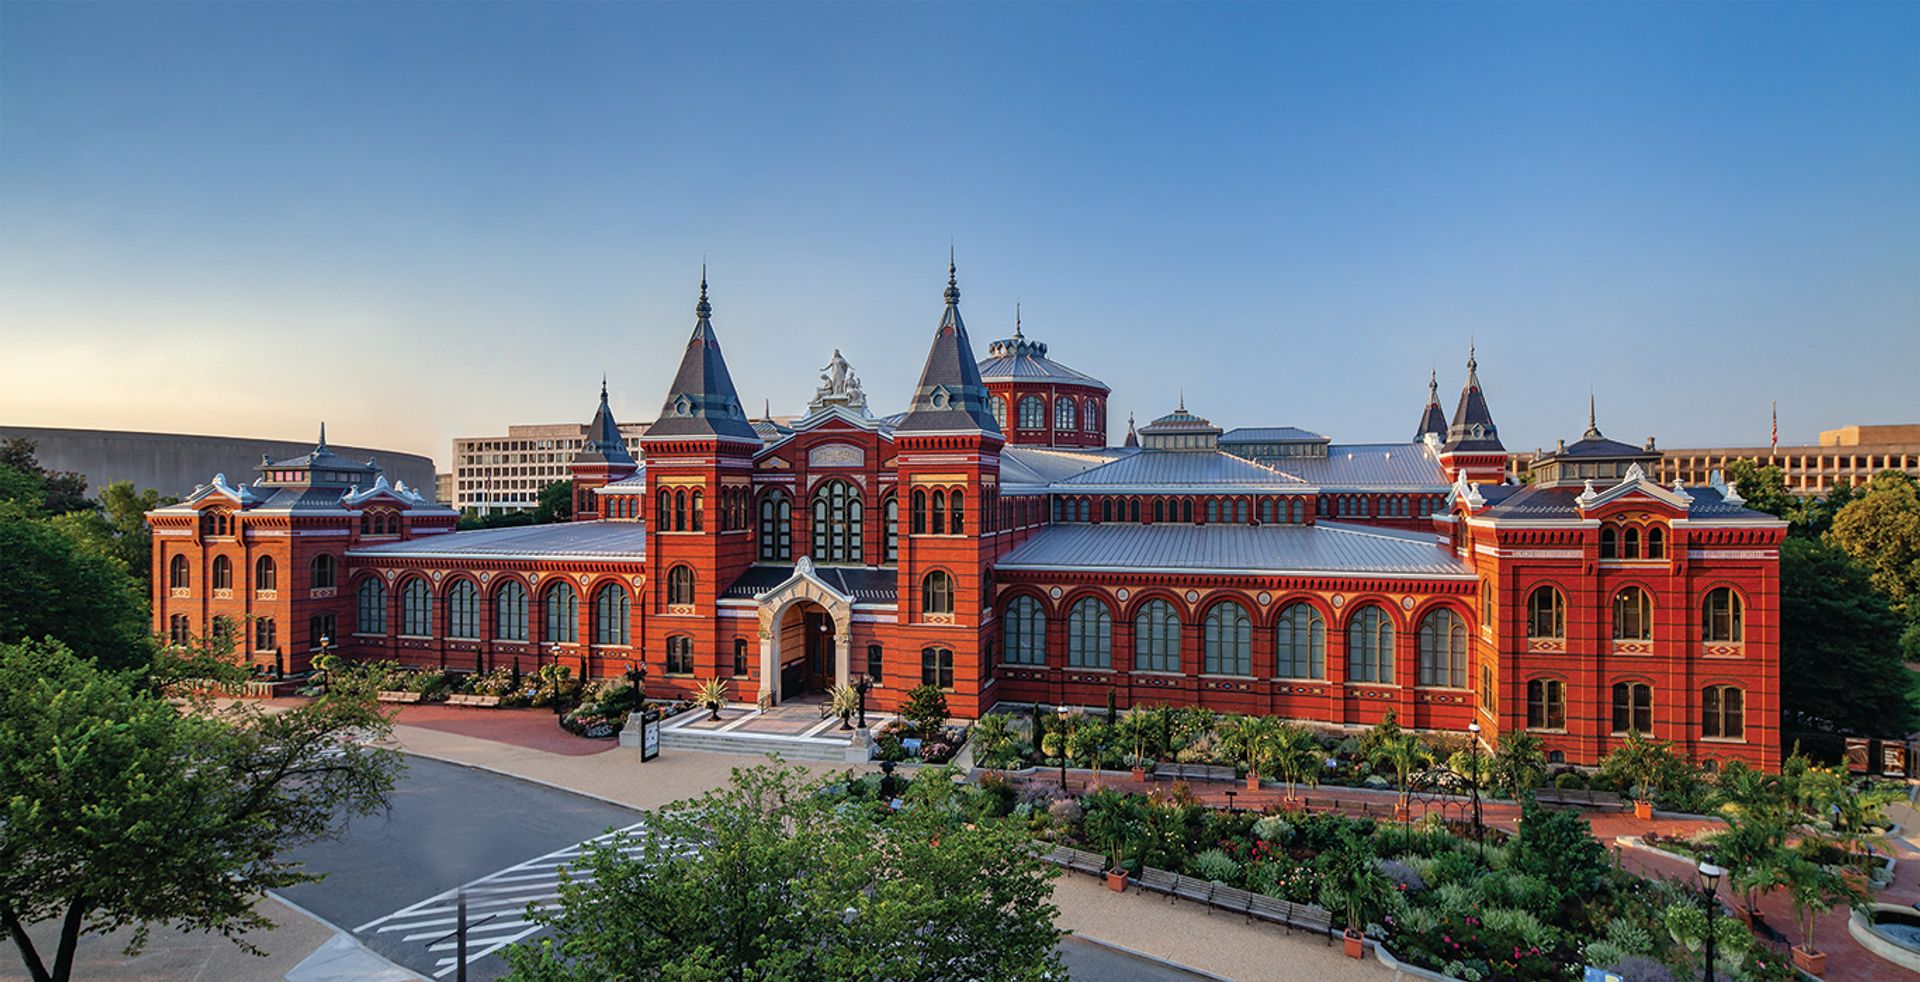 The Arts and Industries Building at the Smithsonian Institution in Washington, DC Courtesy of the Smithsonian Institution